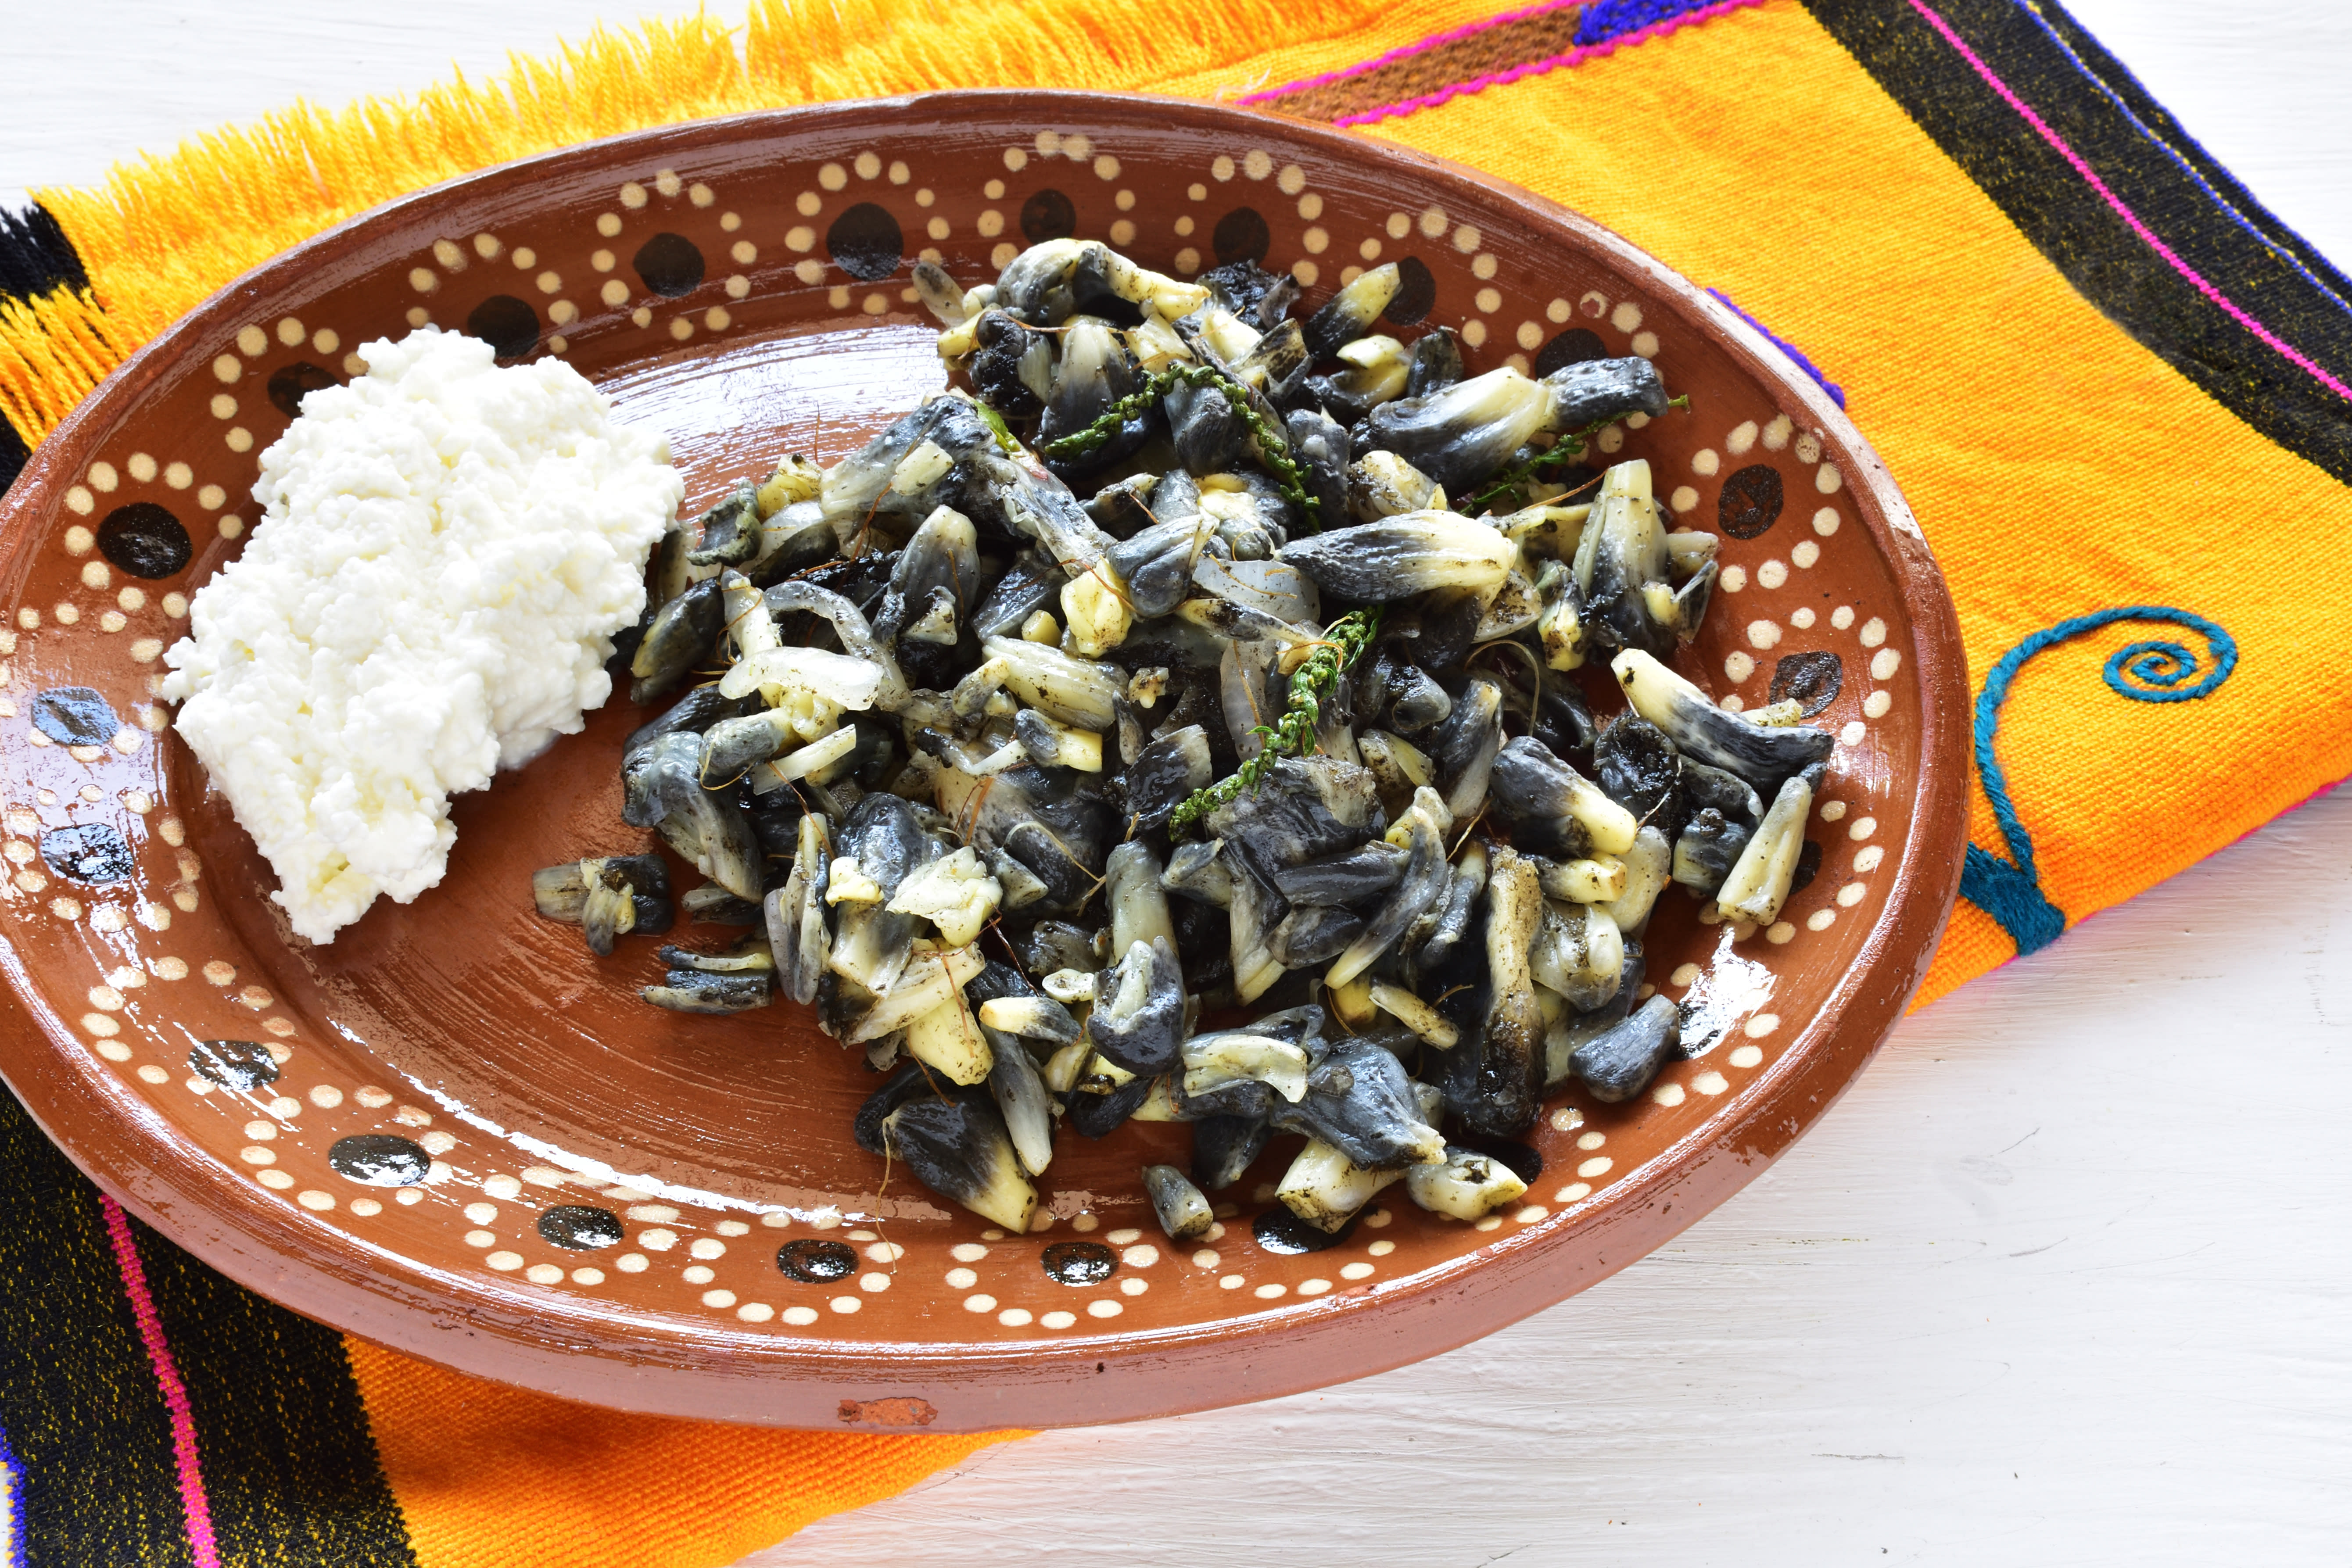 Huitlacoche, a Mexican delicacy made from corn fungus